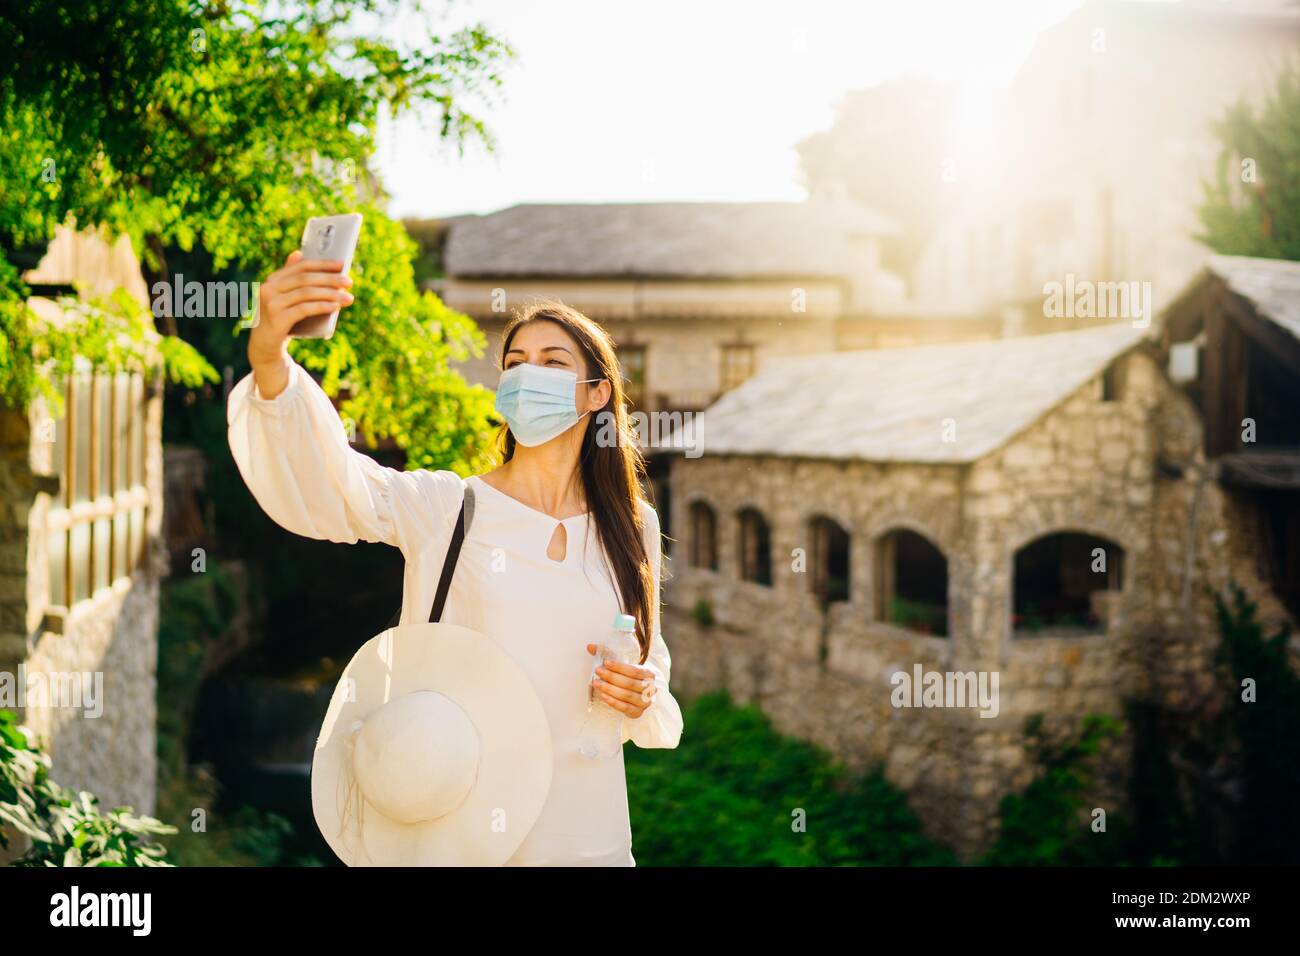 Young tourist woman with face mask travelling to European cities during coronavirus pandemic outbreak. Travel to Europe amid COVID-19. Visiting local Stock Photo